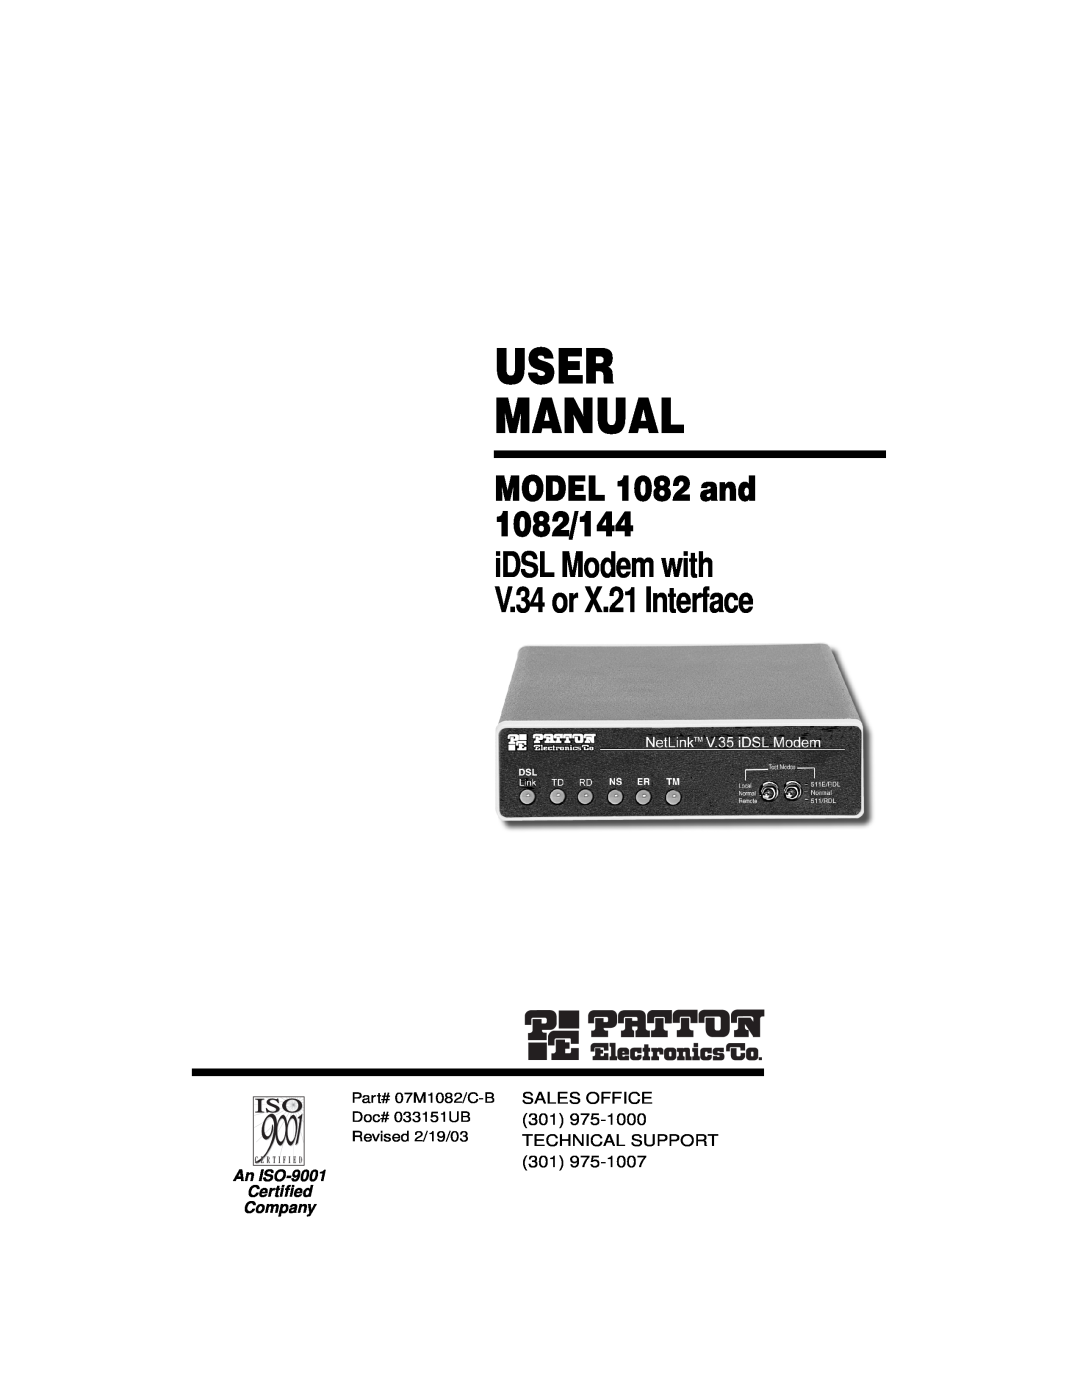 Patton electronic user manual User Manual, MODEL 1082 and 1082/144, iDSL Modem with V.34 or X.21 Interface 